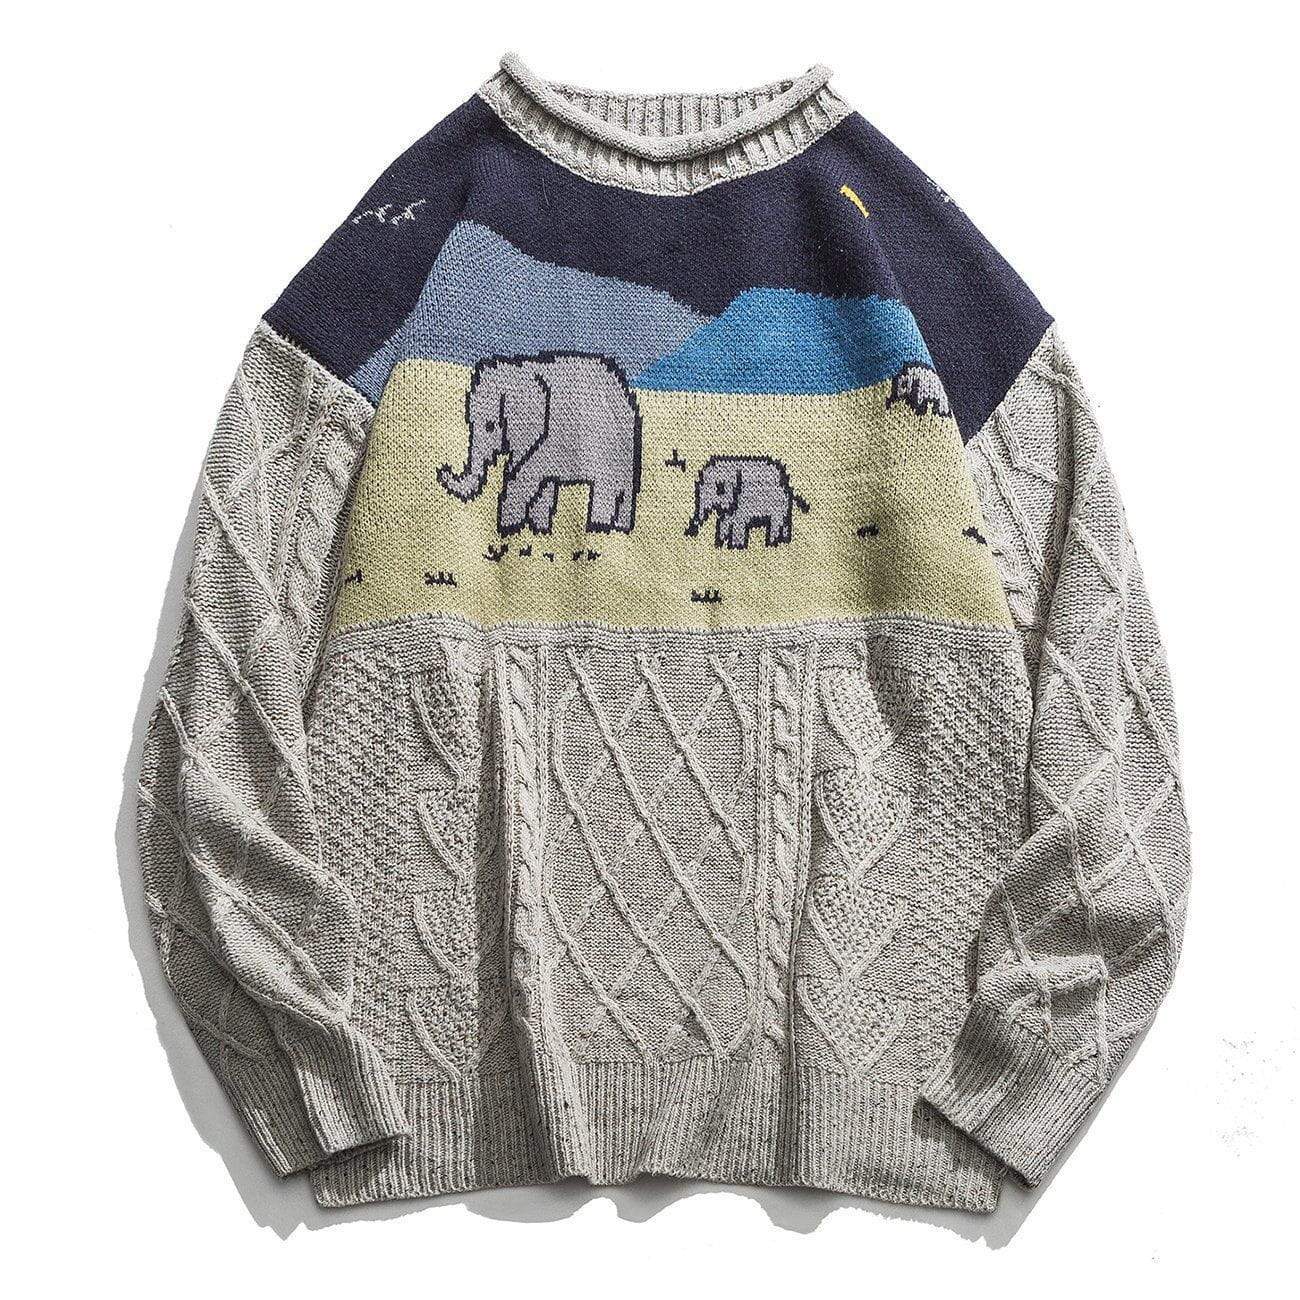 Vintage Elephant Knitted Sweater